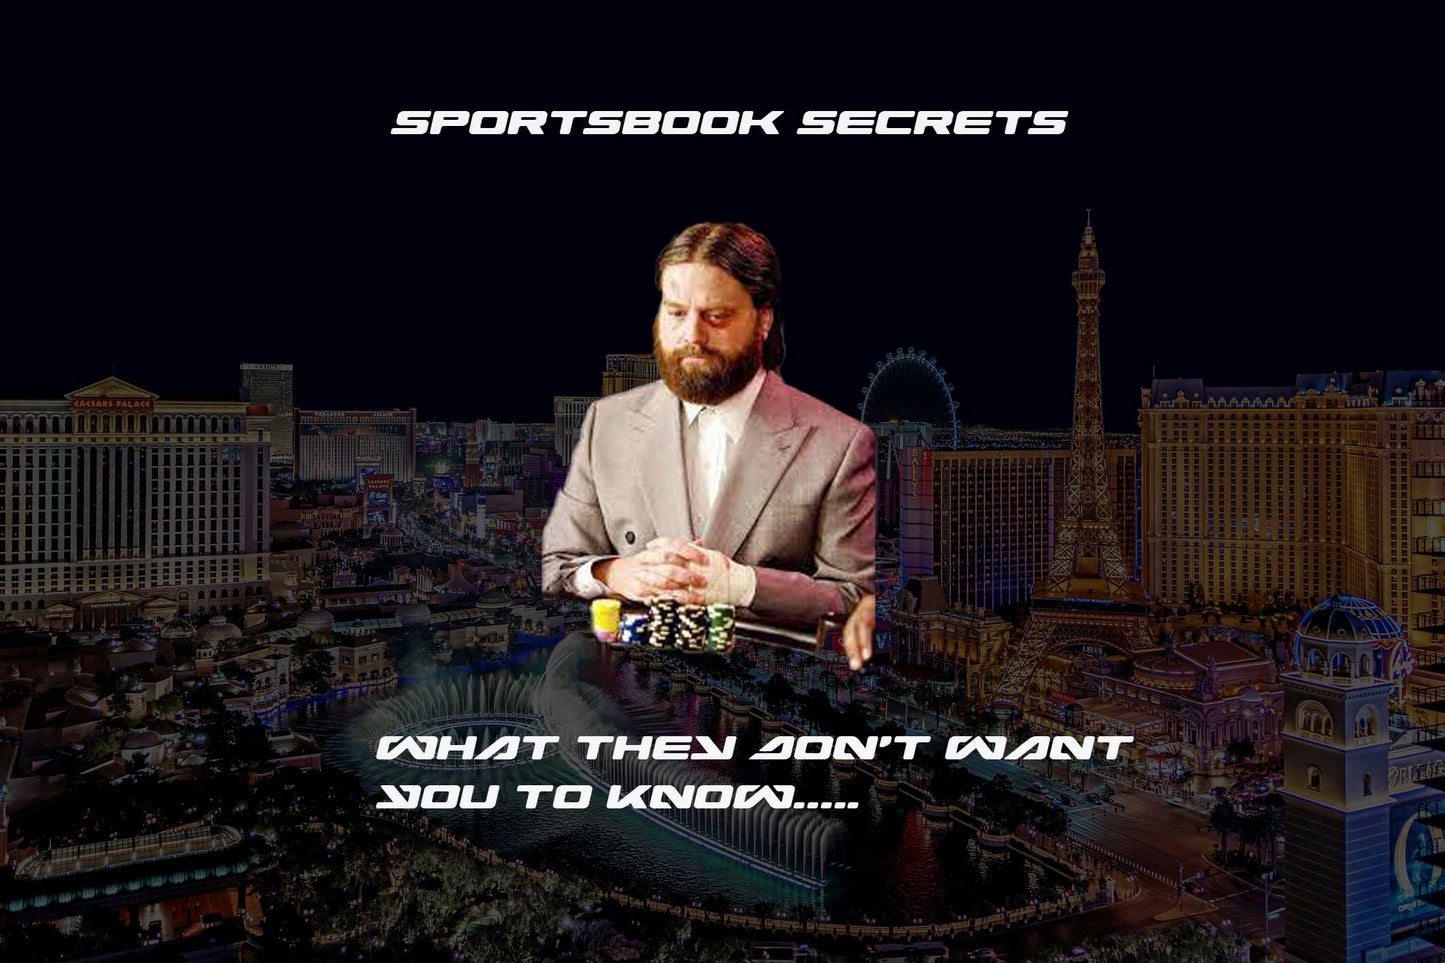 Sportsbook Secrets - ALL SECRETS INCLUDED Playbook Guide To Winning Big Against The Bookies.